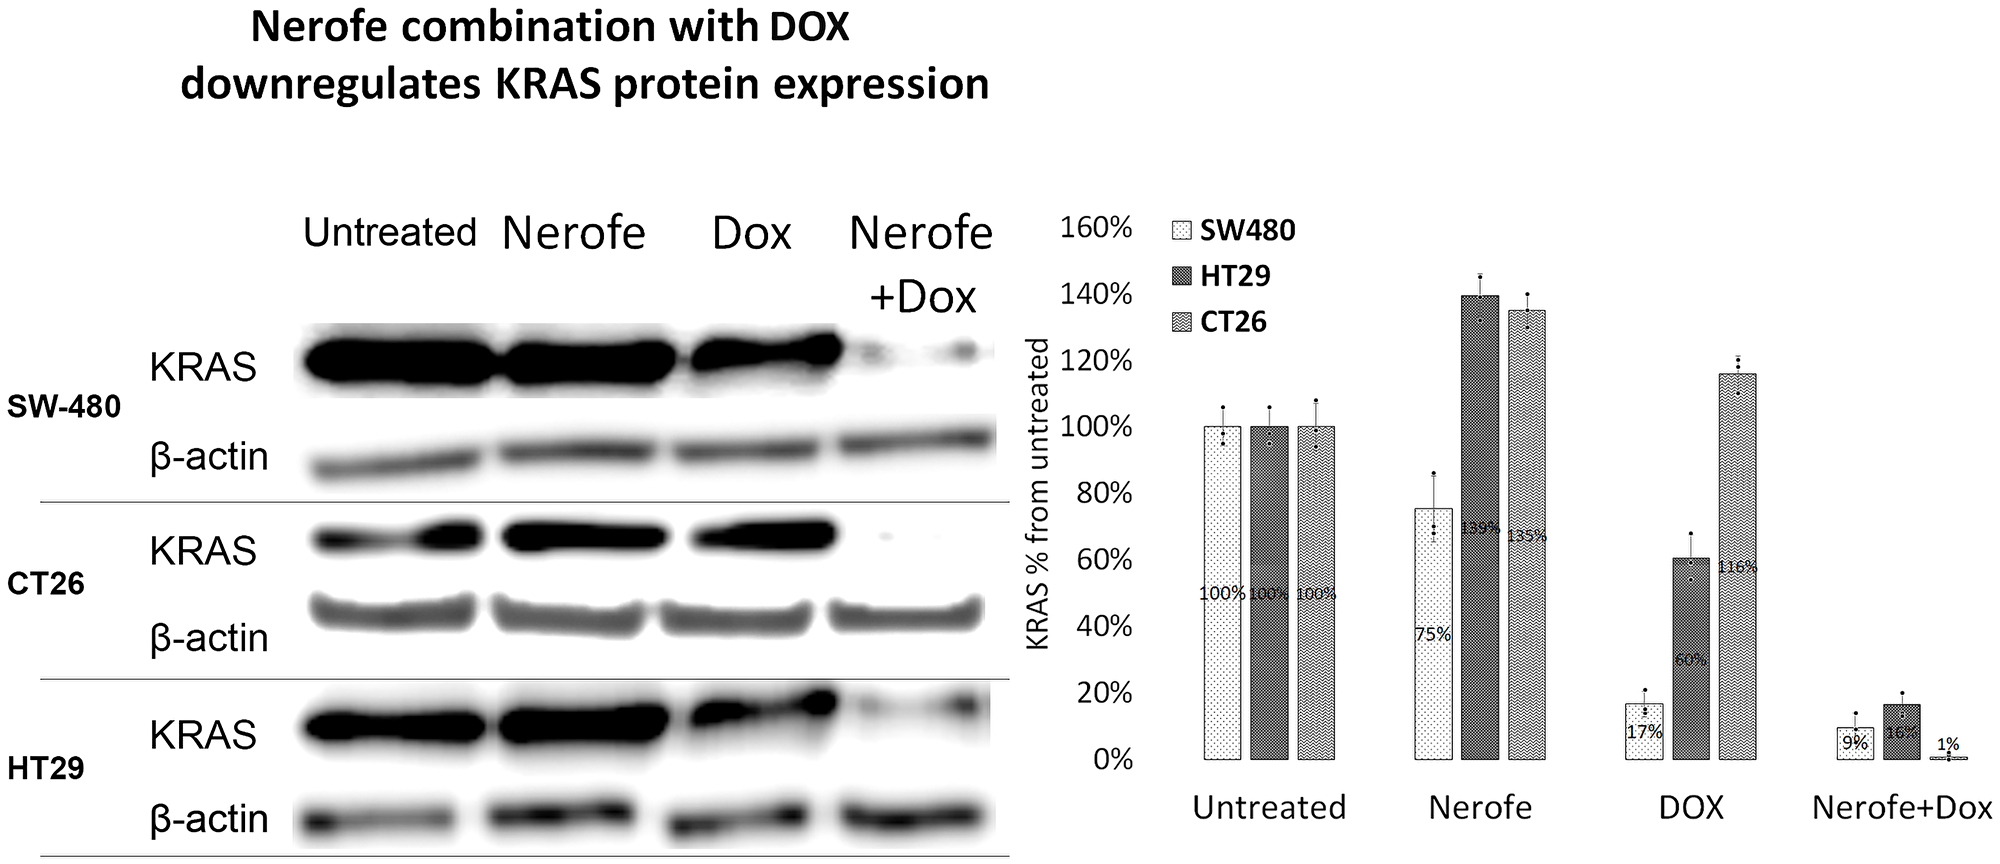 The combination of Nerofe with DOX downregulates KRAS protein expression in mCRC cell lines.